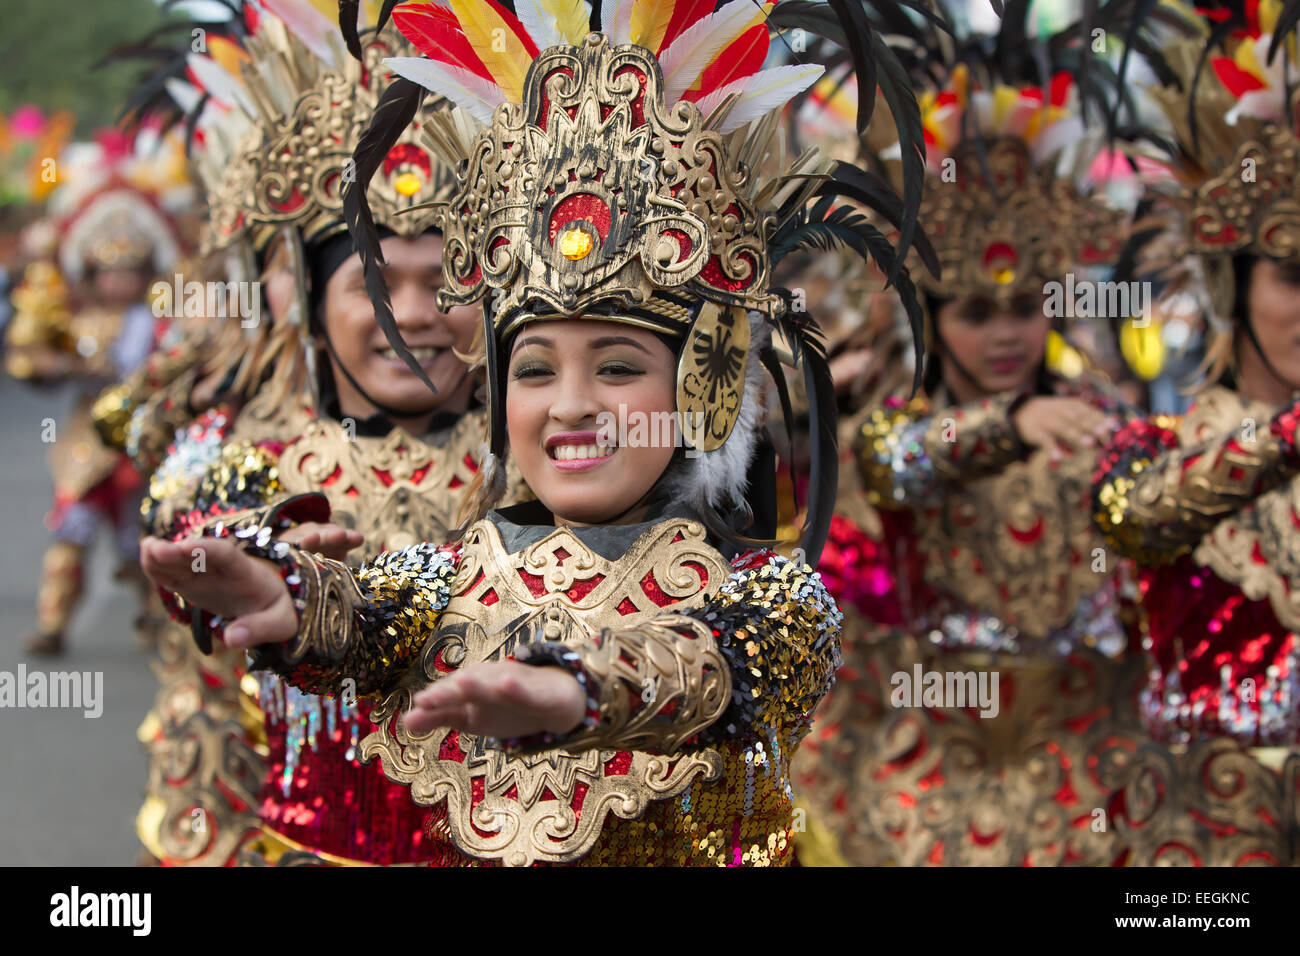 Cebu City, Philippines. 18th Jan, 2015. One of the largest festivals in the Philippines takes place over a nine day period in January. Celebrating the Catholic belief in the Jesus child Santo Nino, various religious ceremonies are held culminating in the Sinulog Grande Parade,a procession of street dancing throughout the City. Credit:  imagegallery2/Alamy Live News Stock Photo